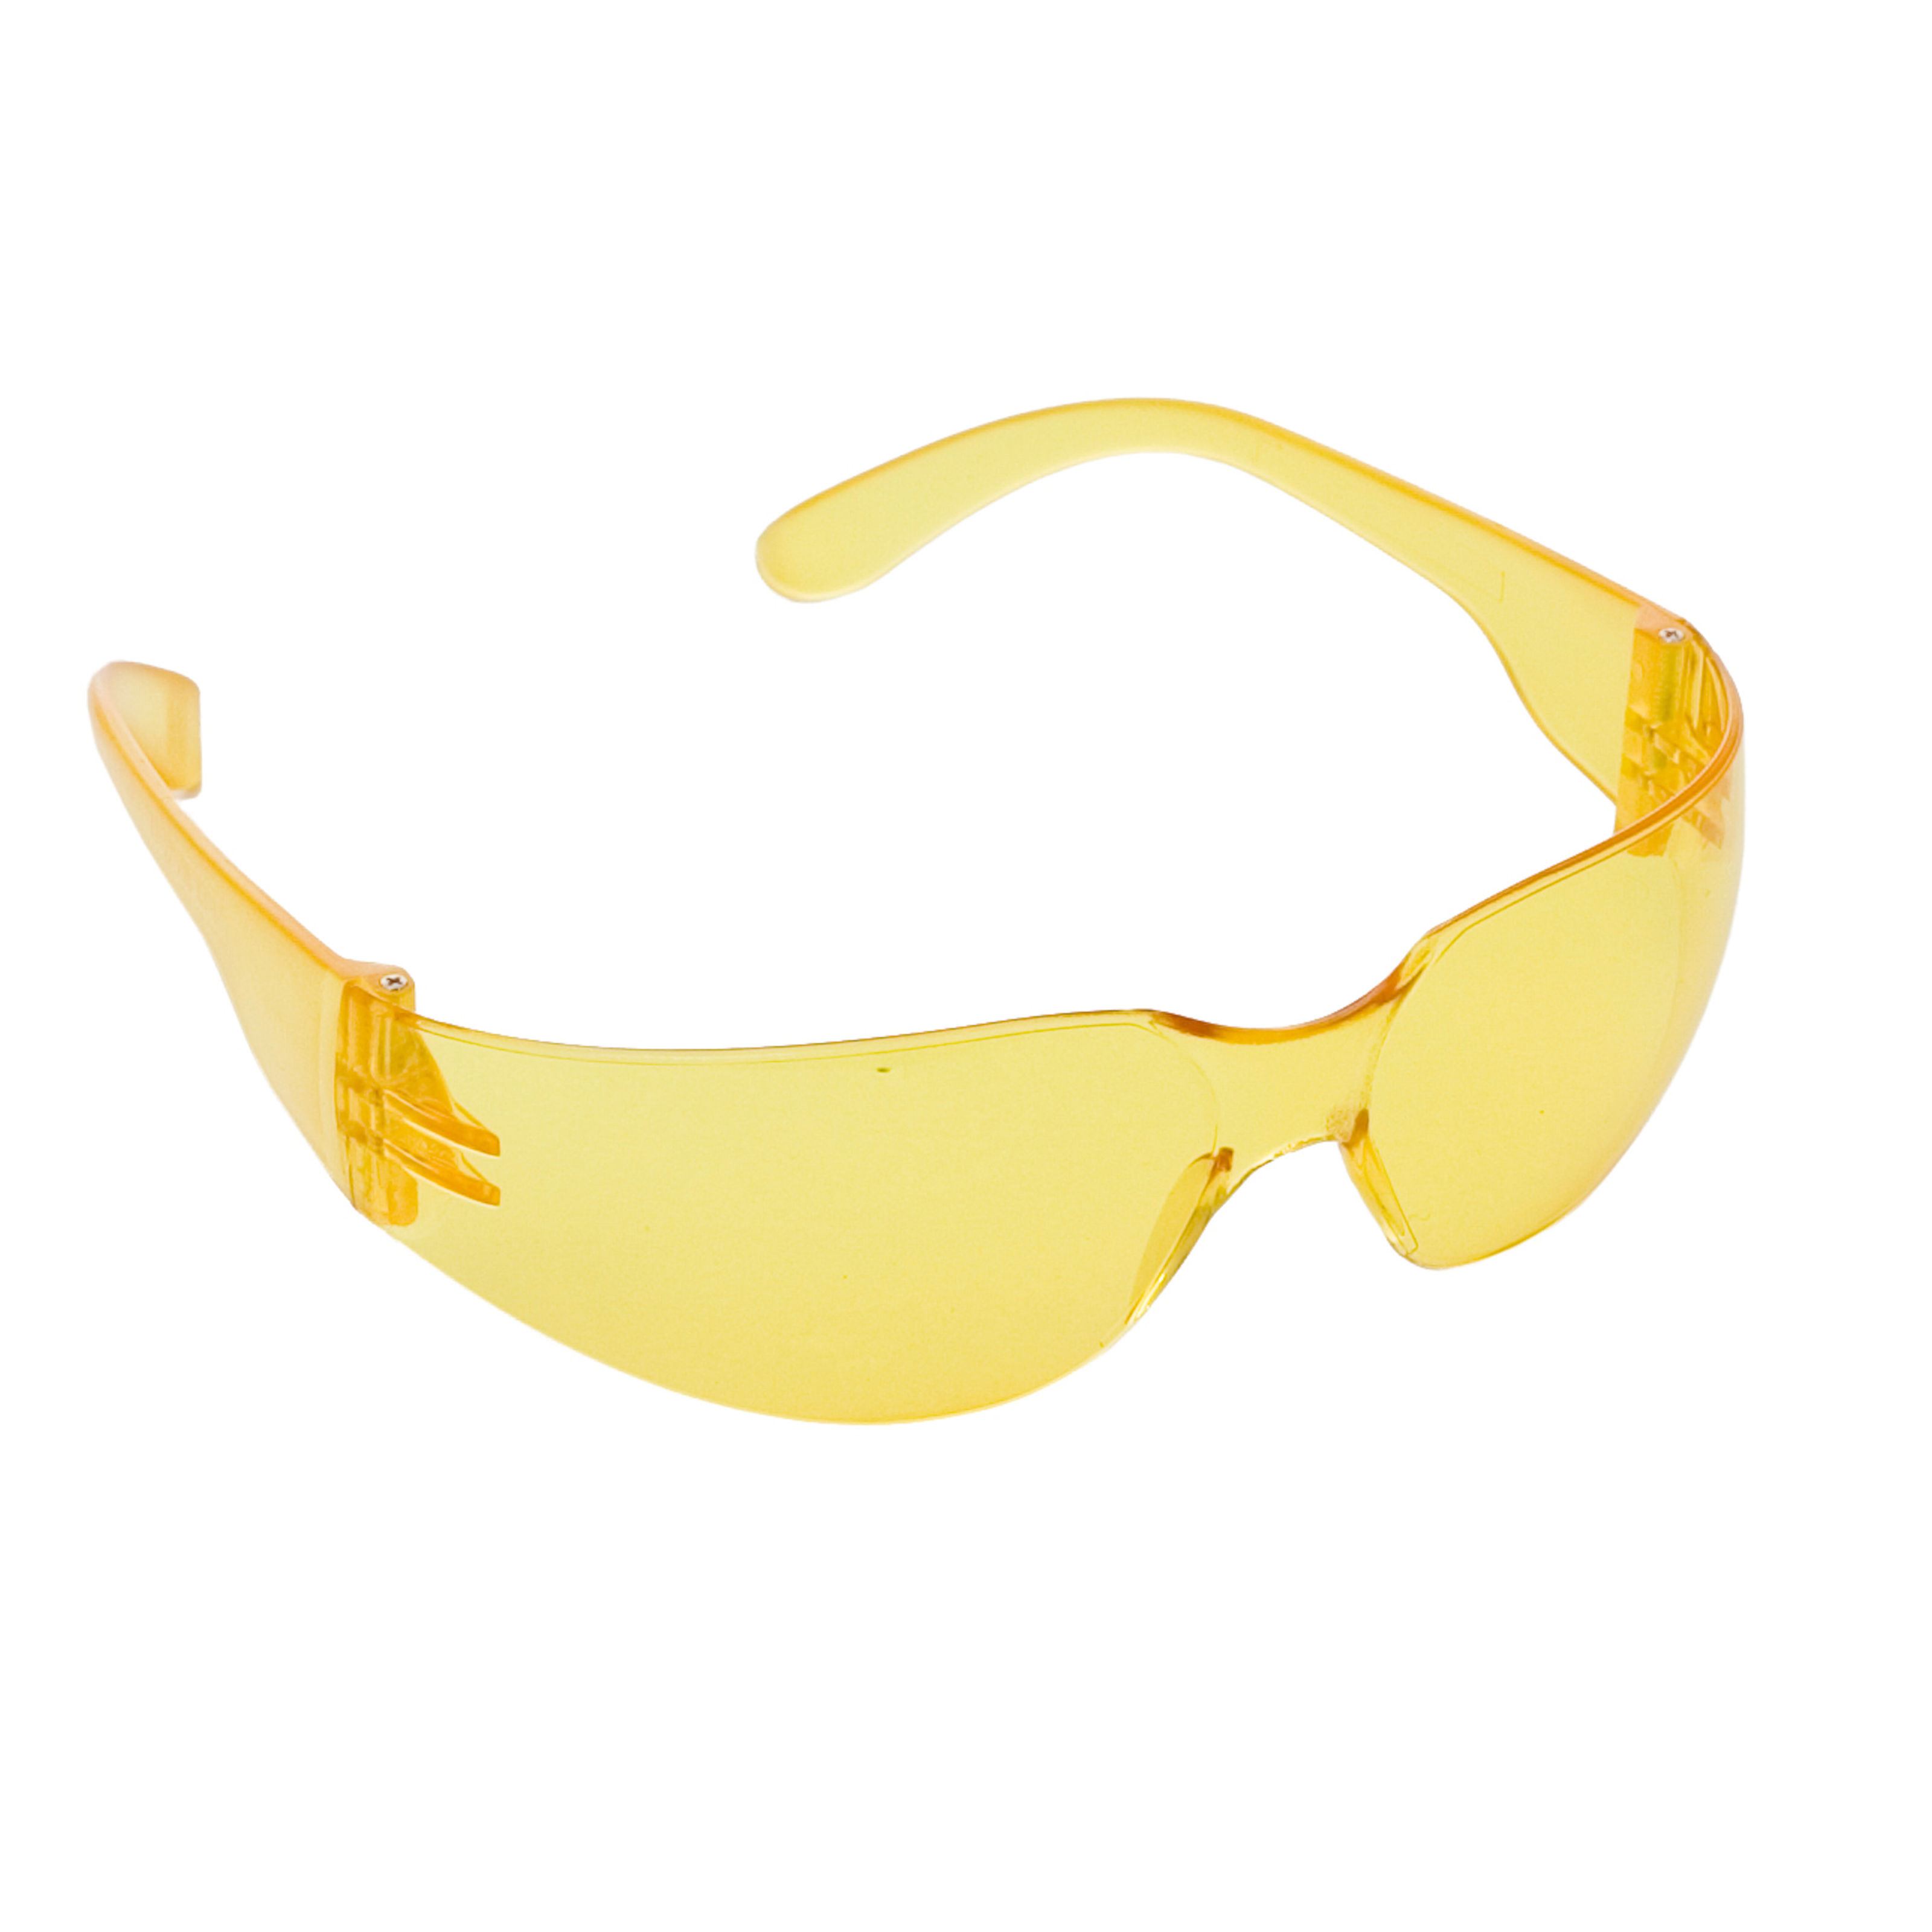 Proforce Yellow Protective Safety Glasses